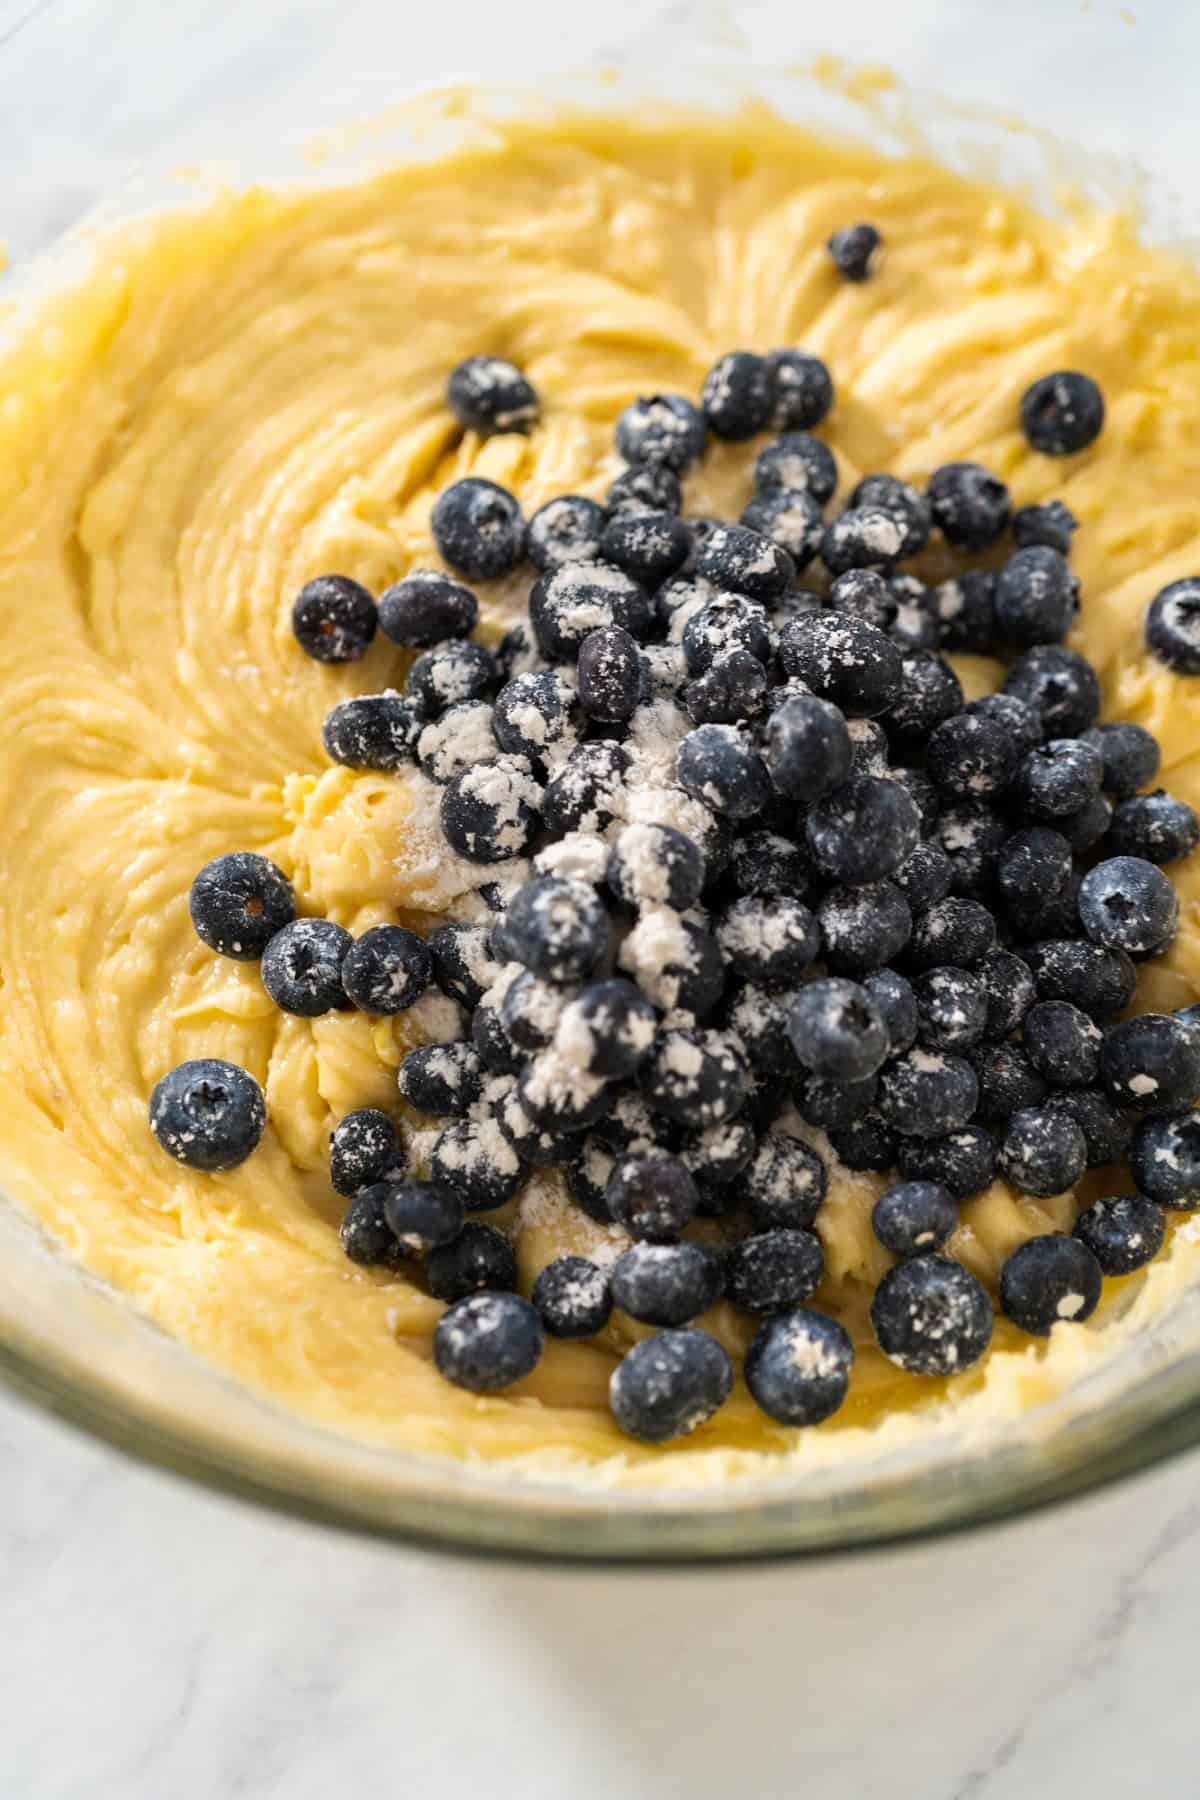 Cake batter in a bowl with blueberries.